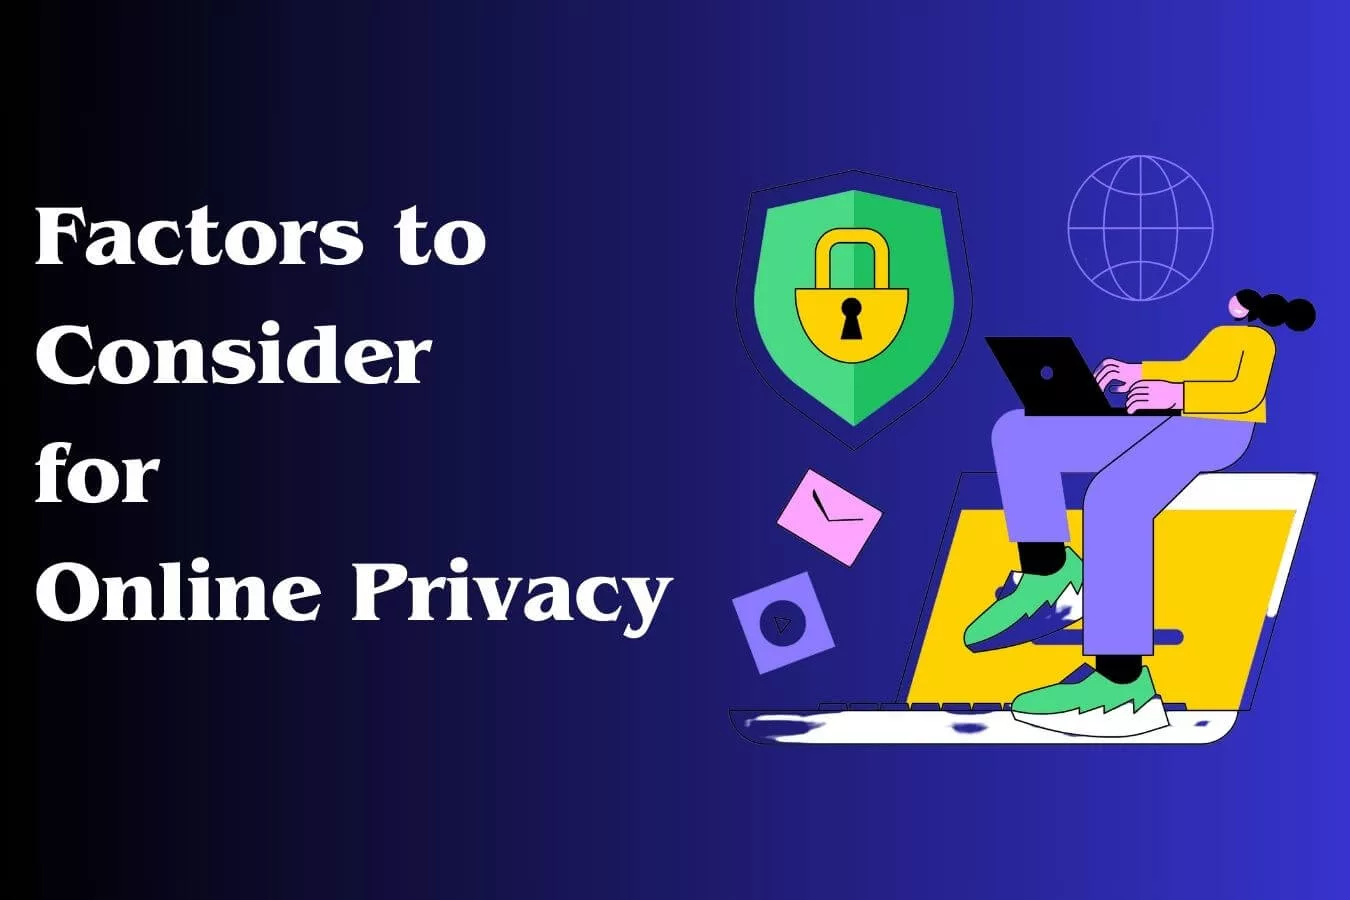 Factors to Consider for Online Privacy